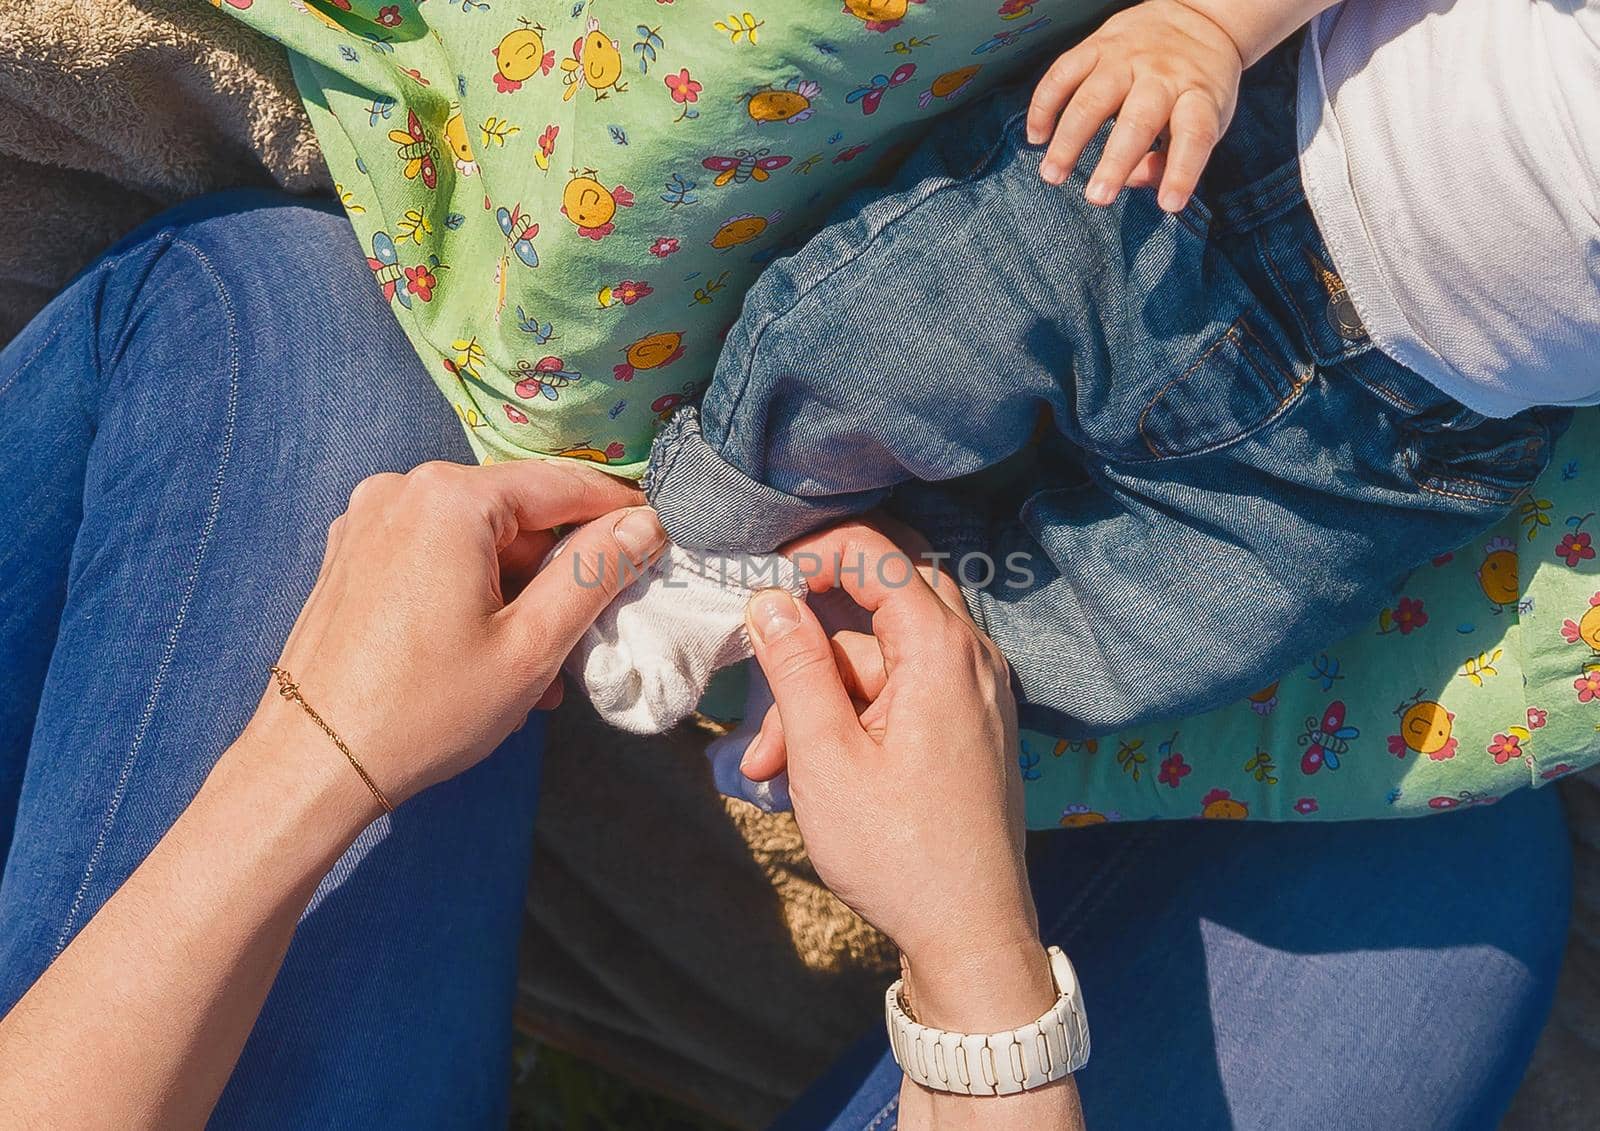 Mom's hands put on socks on the baby's feet, close up.